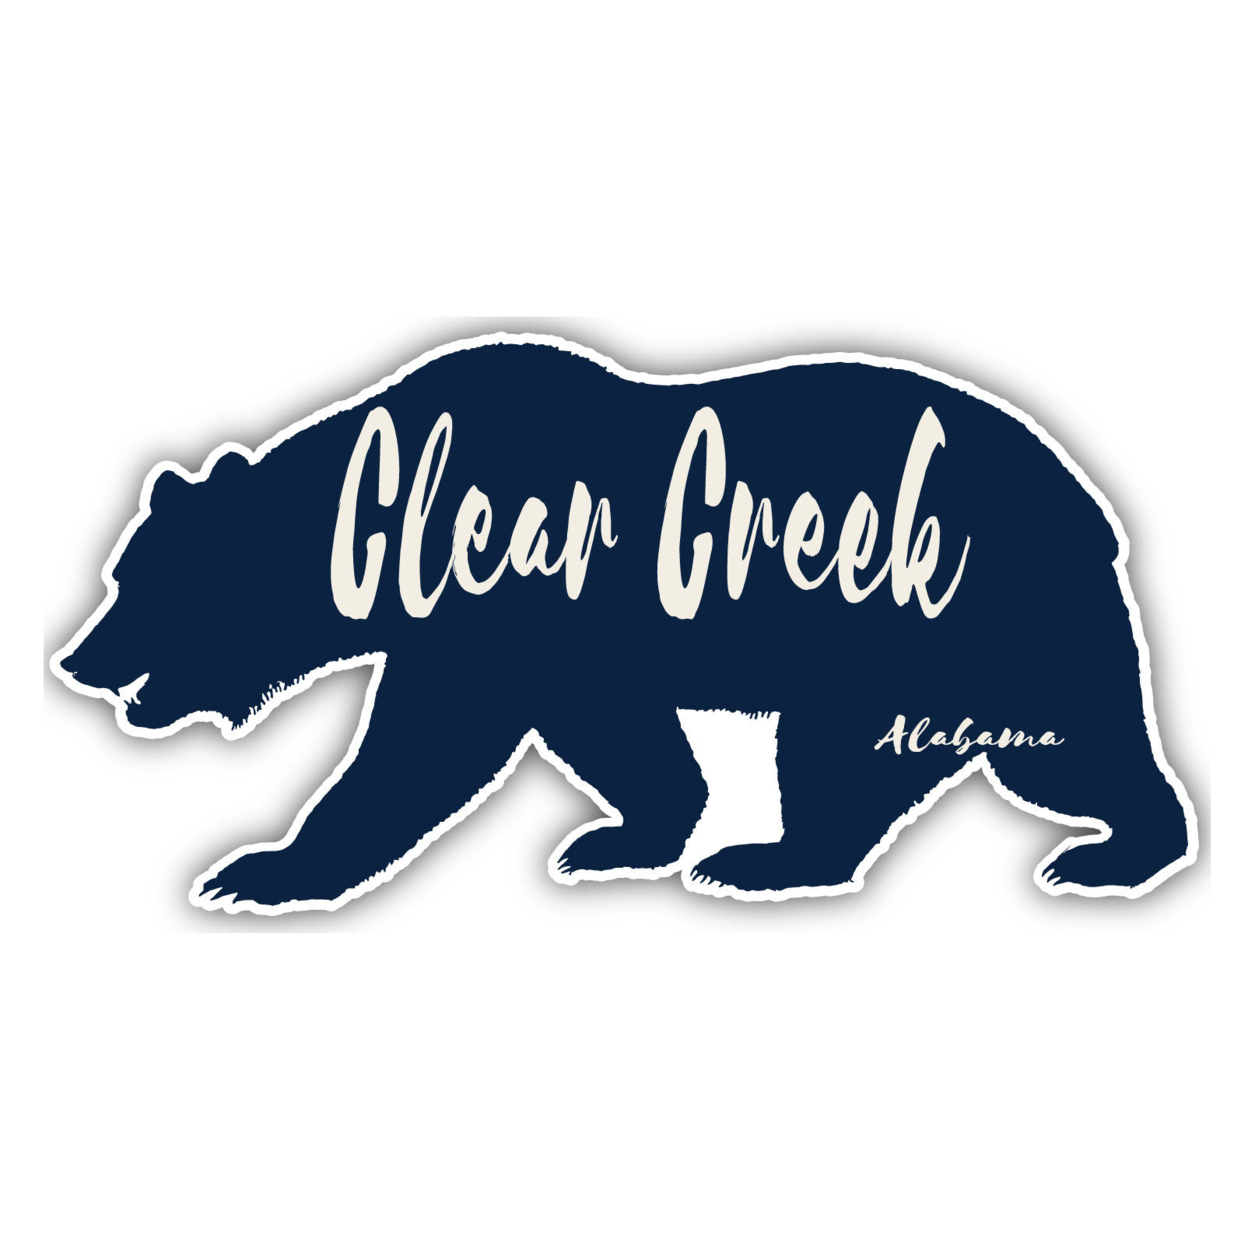 Clear Creek Alabama Souvenir Decorative Stickers (Choose Theme And Size) - 4-Pack, 10-Inch, Bear